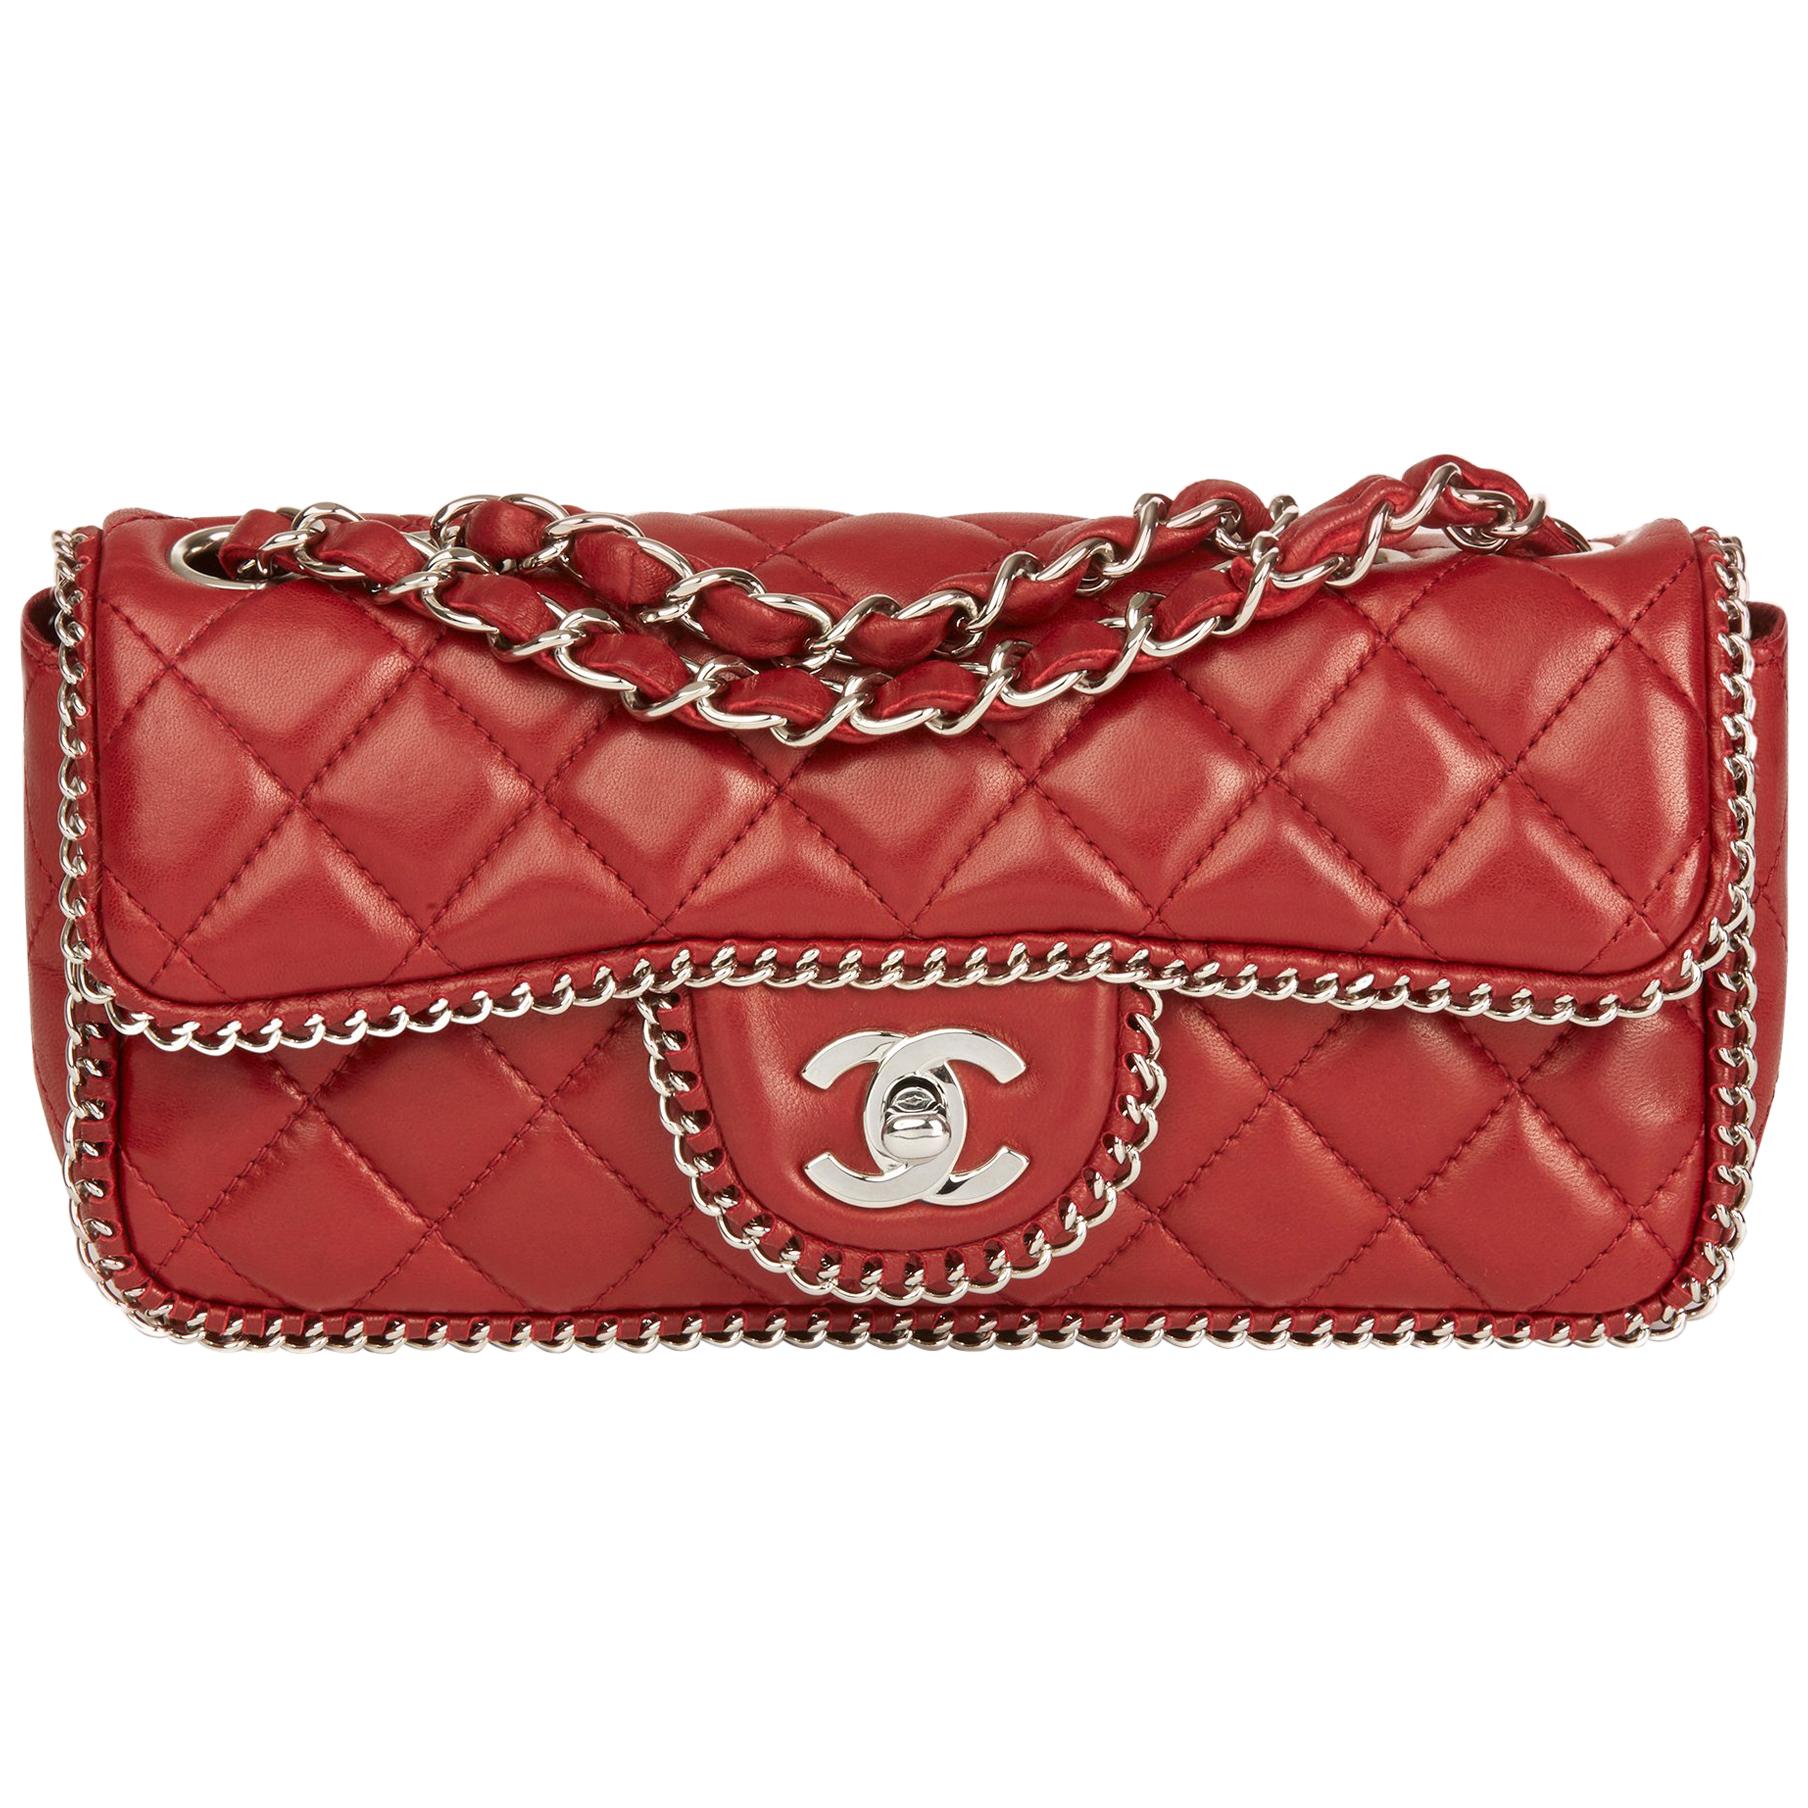 2007 Chanel Burgundy Quilted Lambskin Chain Around East West Classic Single Flap